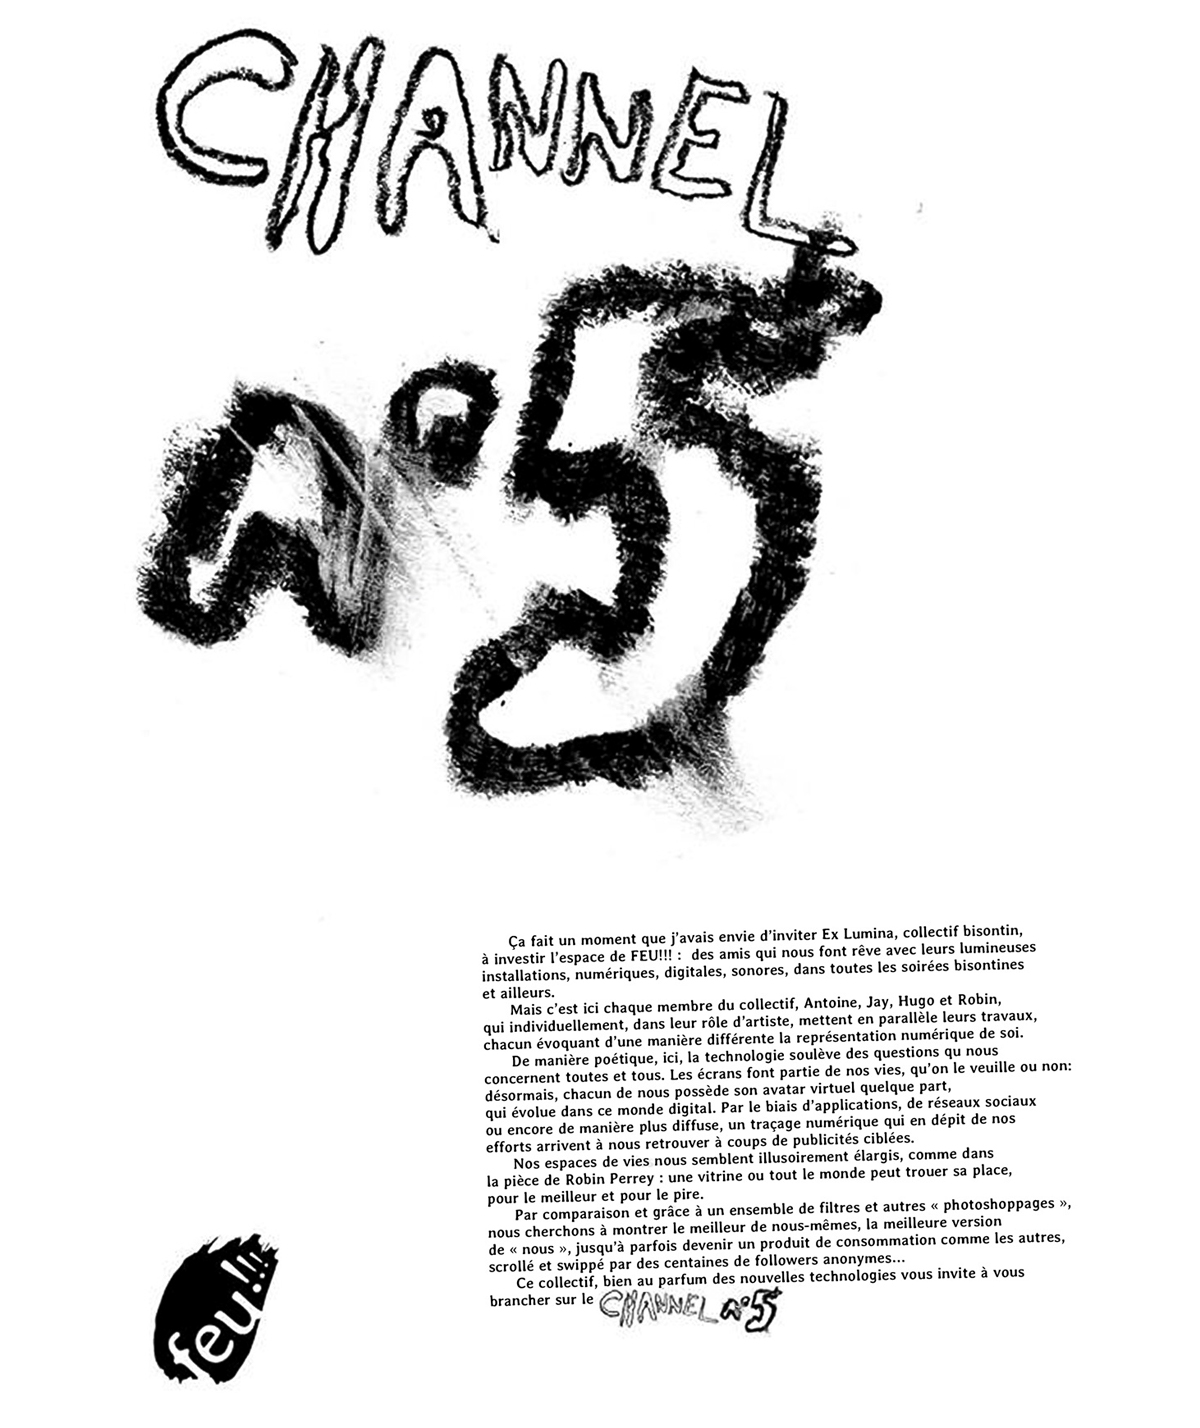 Ex Lumina Mapping at Channel 52